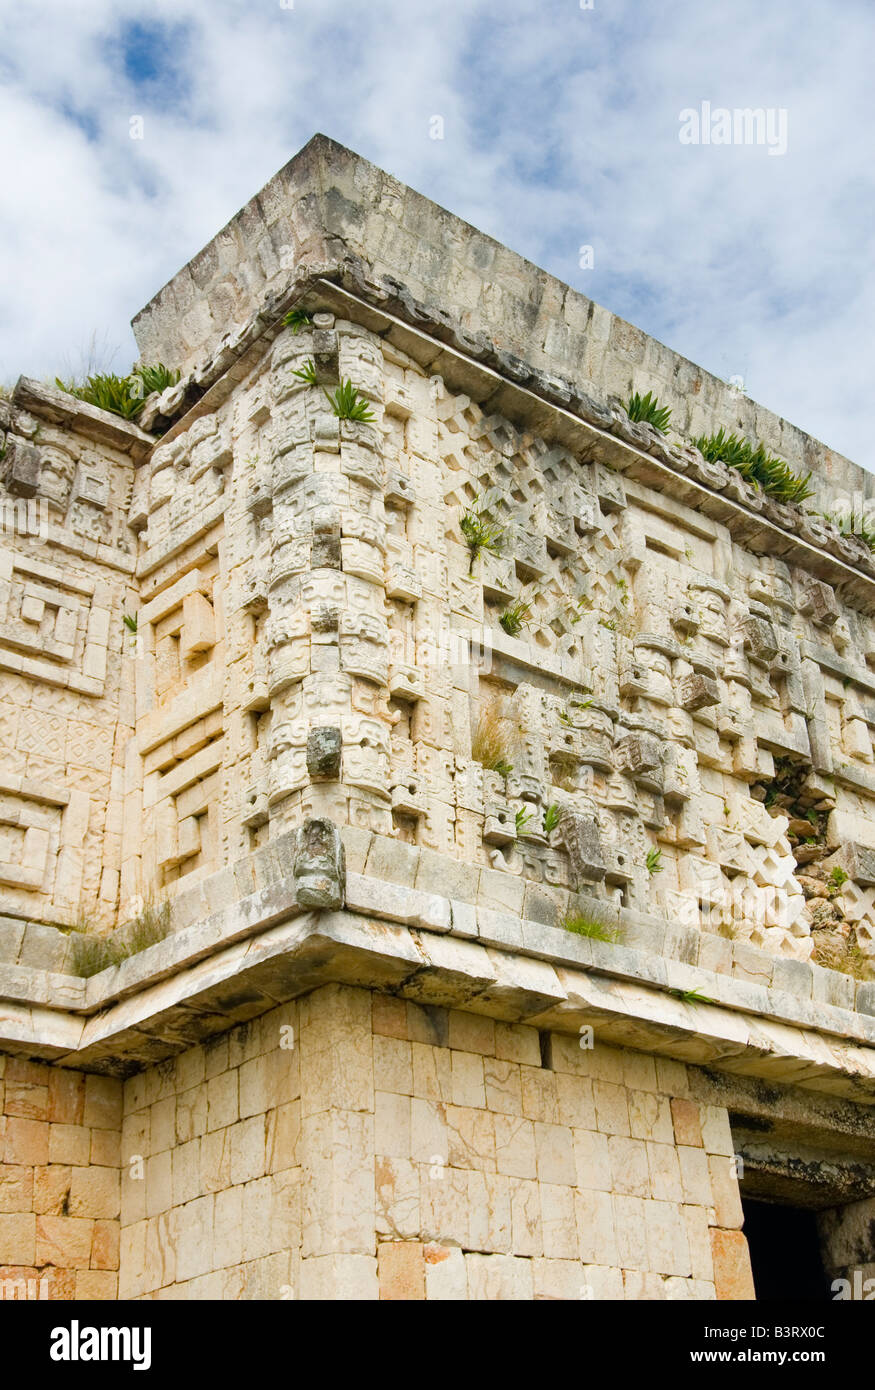 Mexico – Jan 19 2007: Puuc carving detail on a corner of The Palace of the Governor, Uxmal Stock Photo